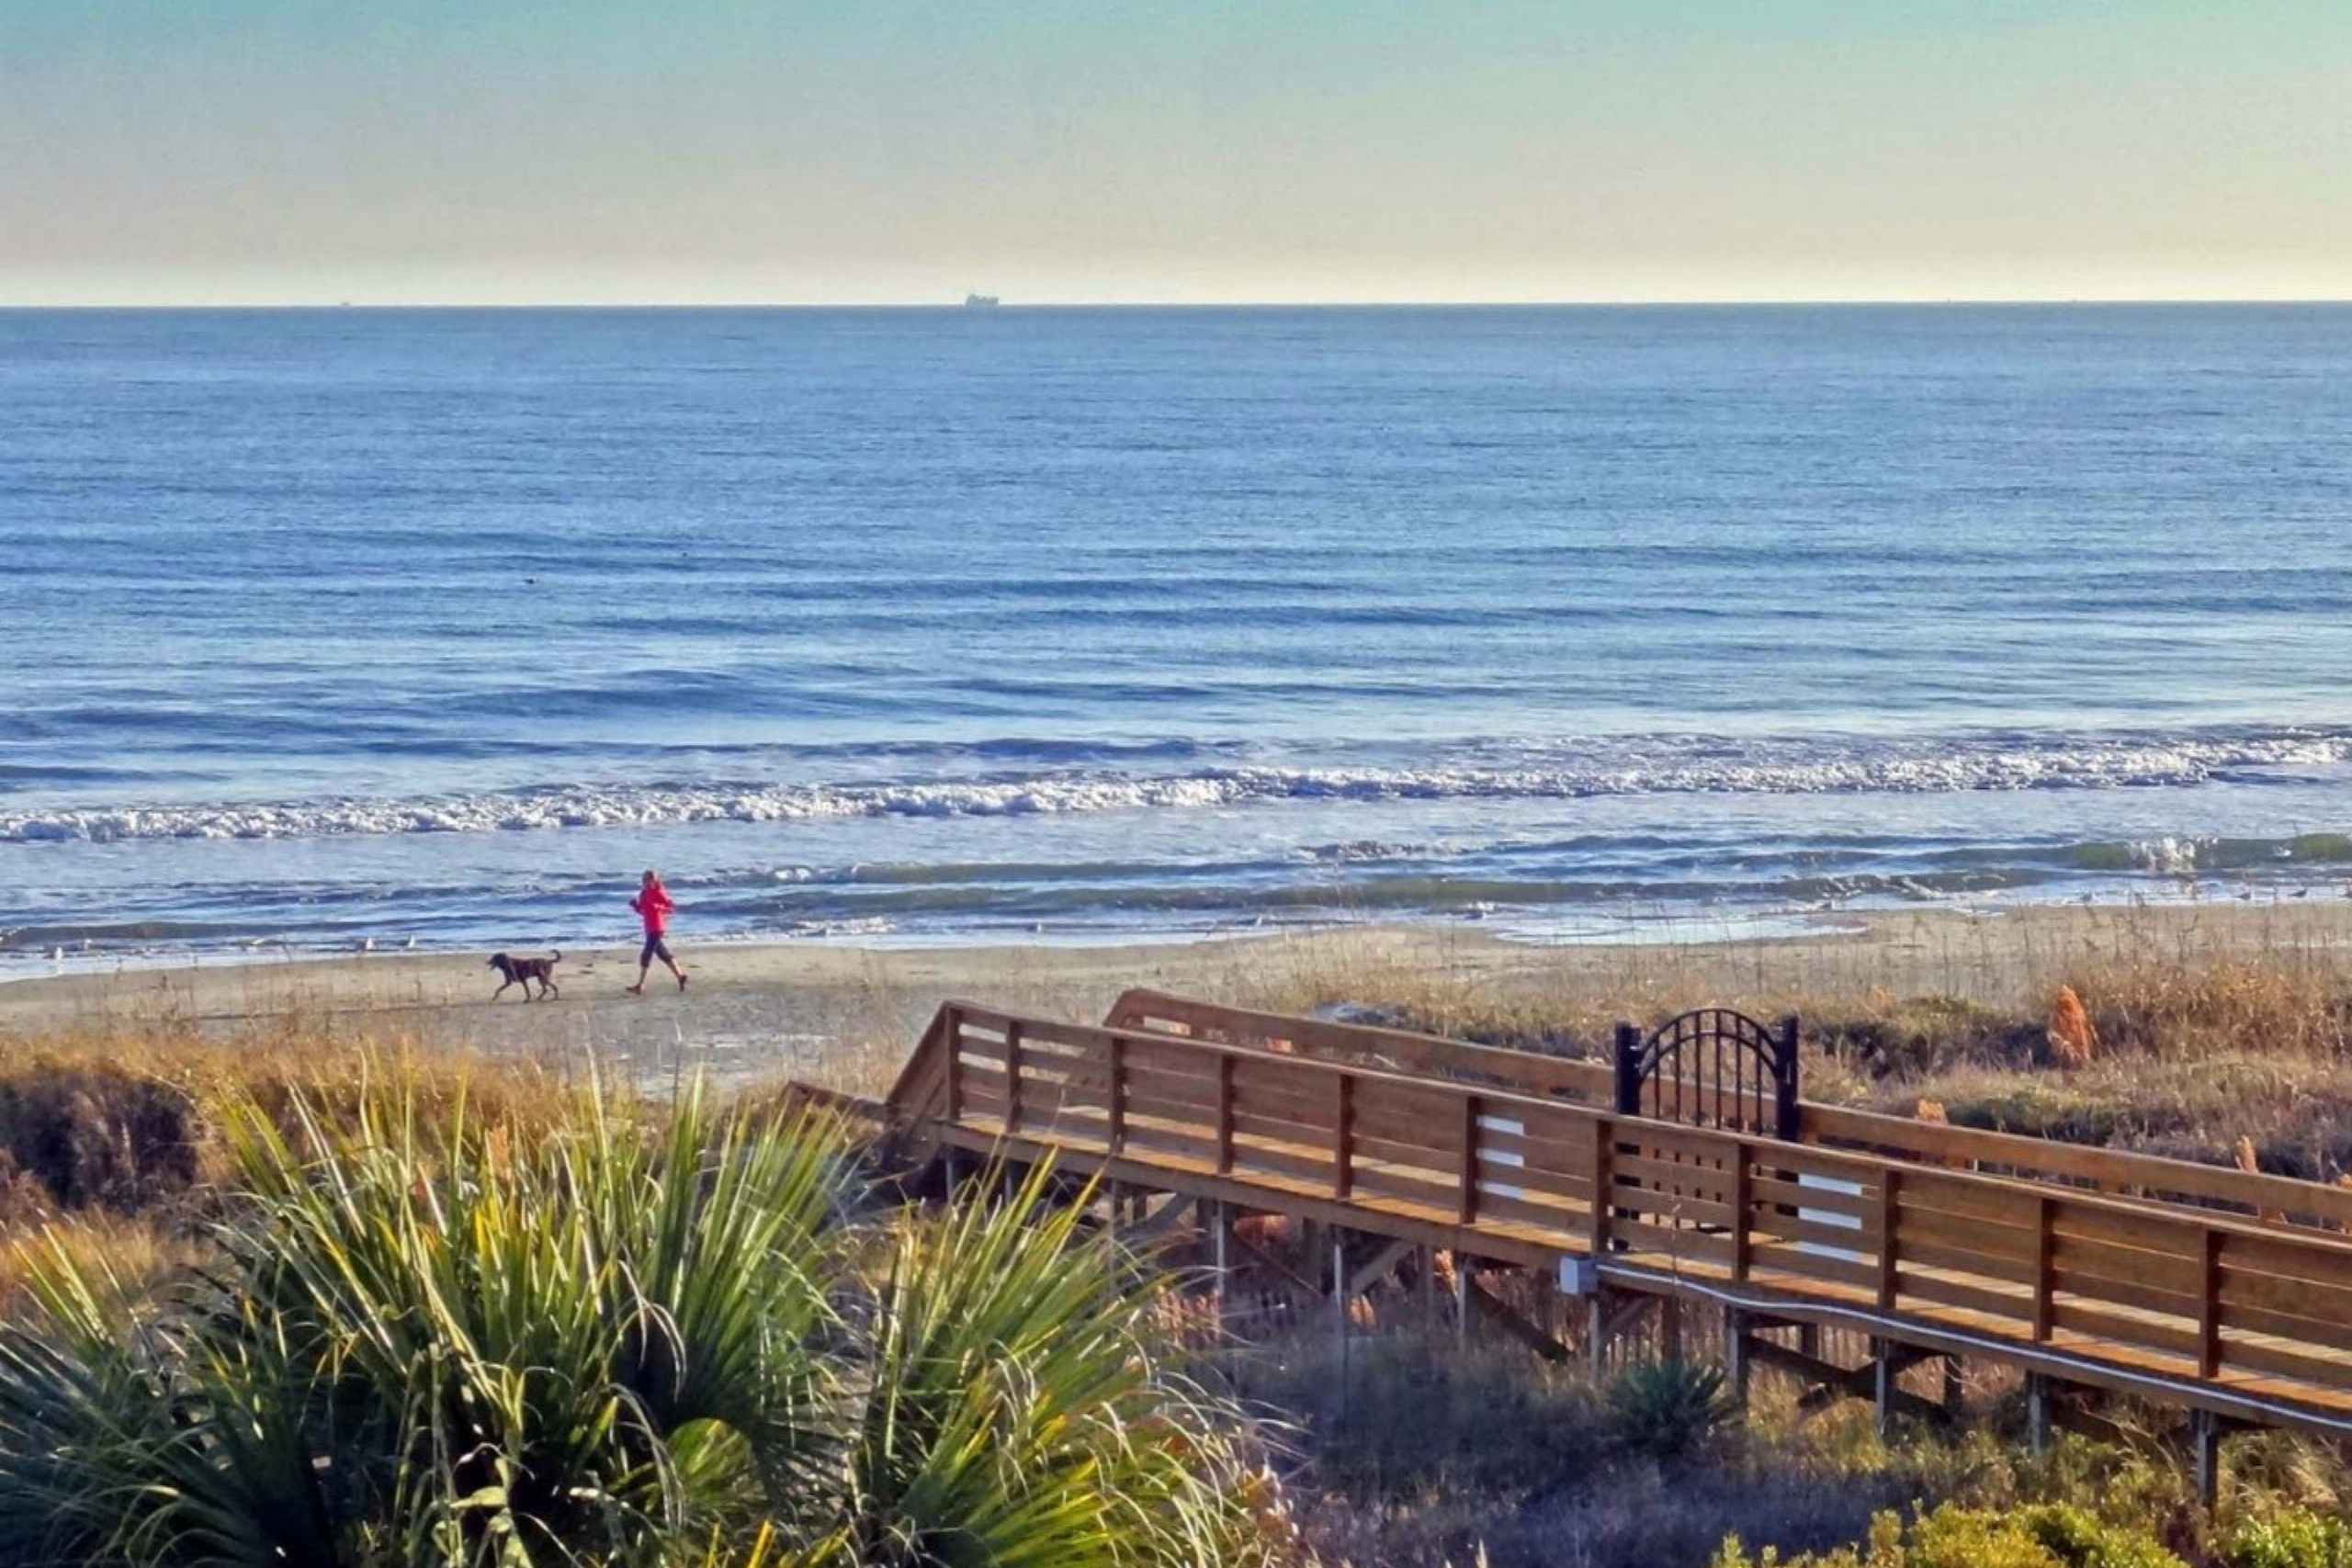 How far is Isle of Palms from Charleston